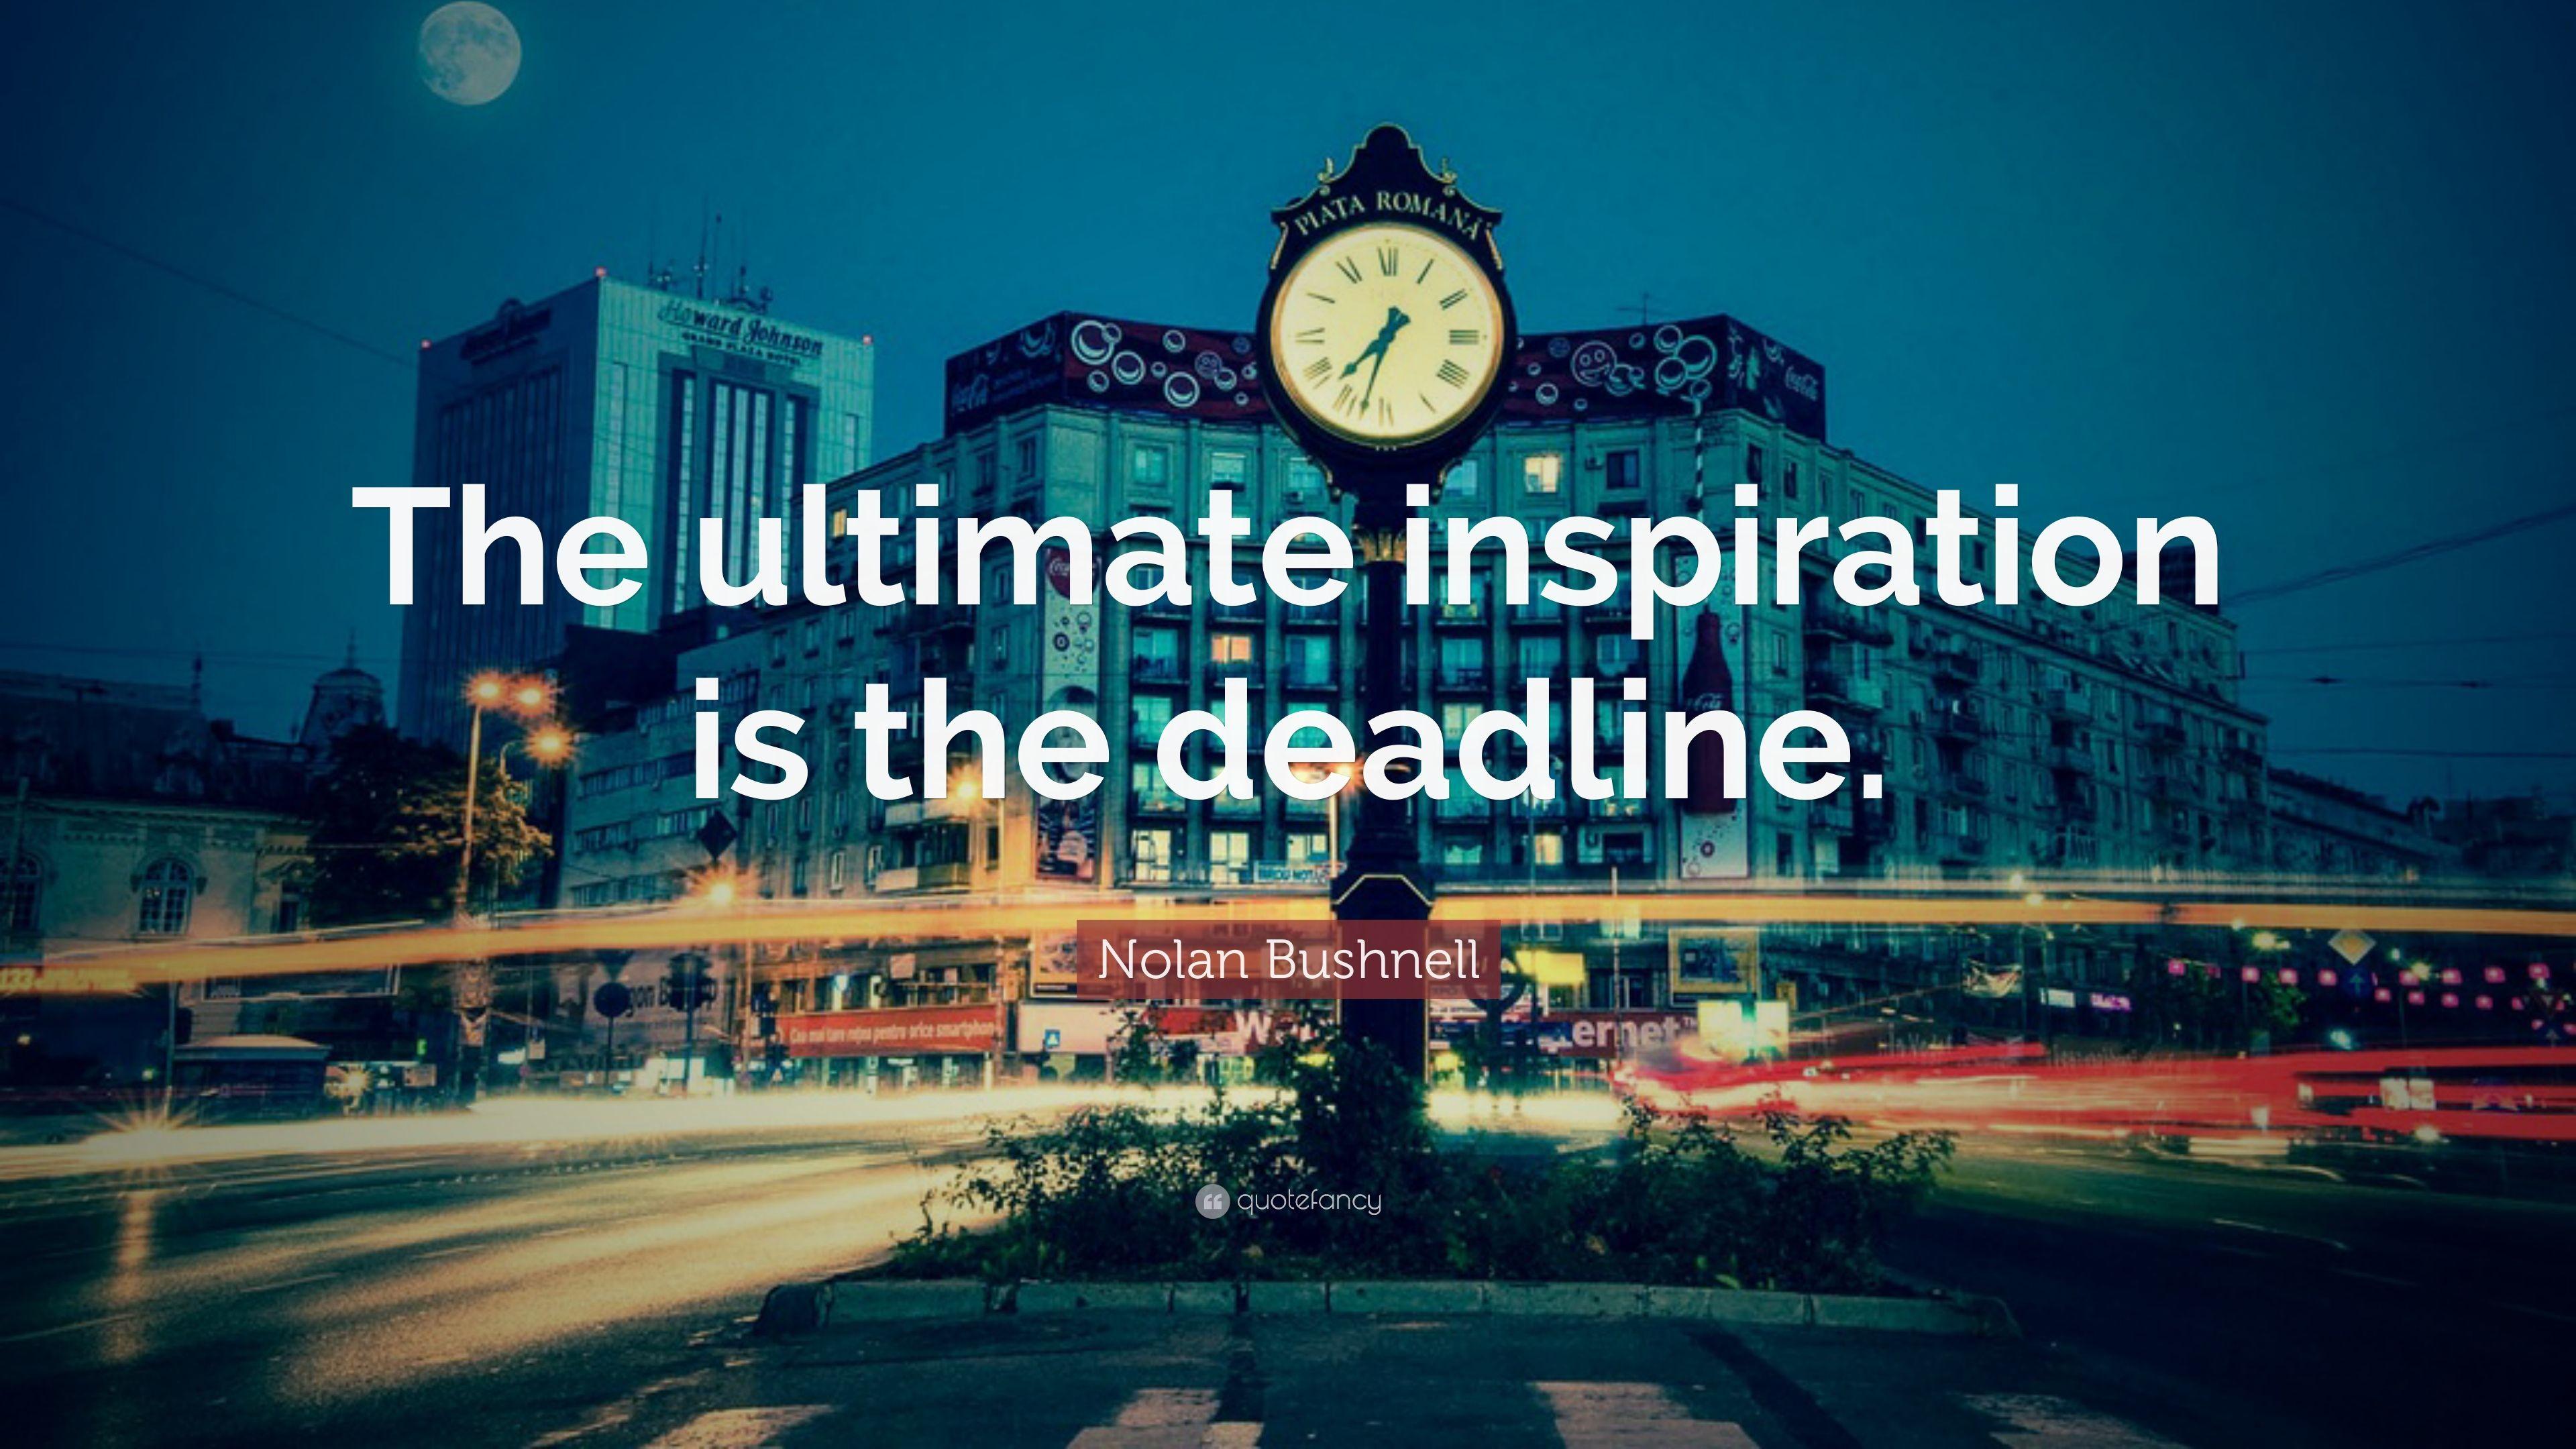 Nolan Bushnell Quote: “The ultimate inspiration is the deadline